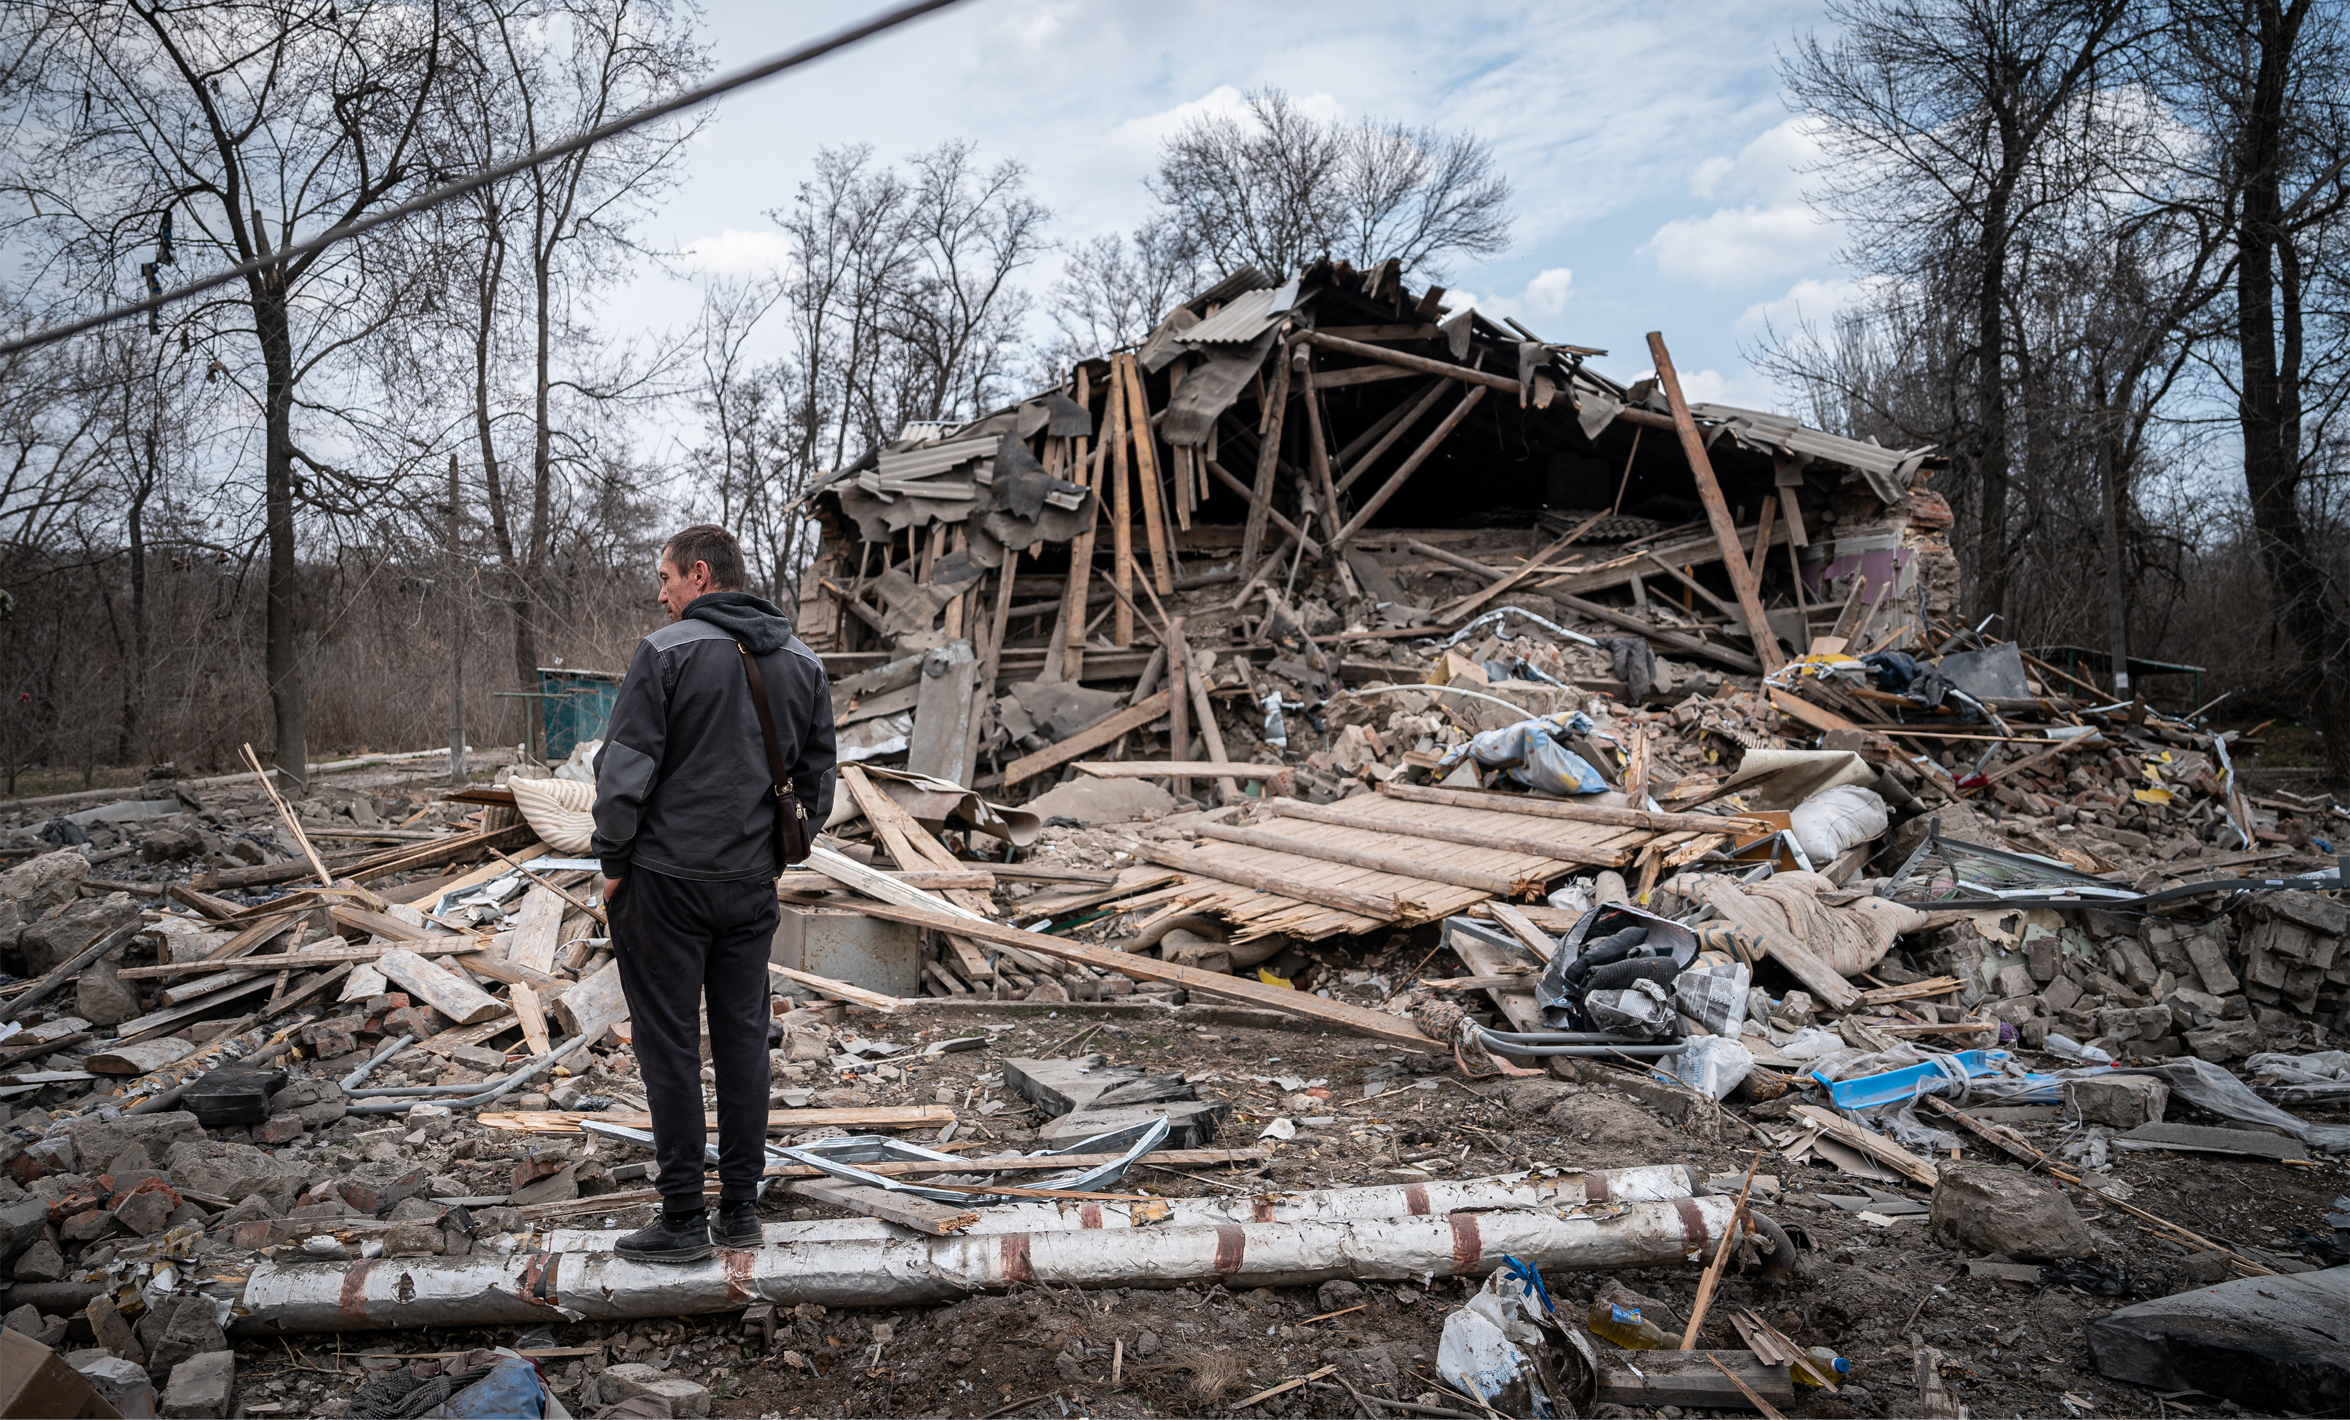 A man looks at the debris after a Russian rocket attack on a residential building for refugees in Kostyantynivka, Ukraine, March 24 2023. Photo by Ignacio Marin/Anadolu Agency via Getty Images.